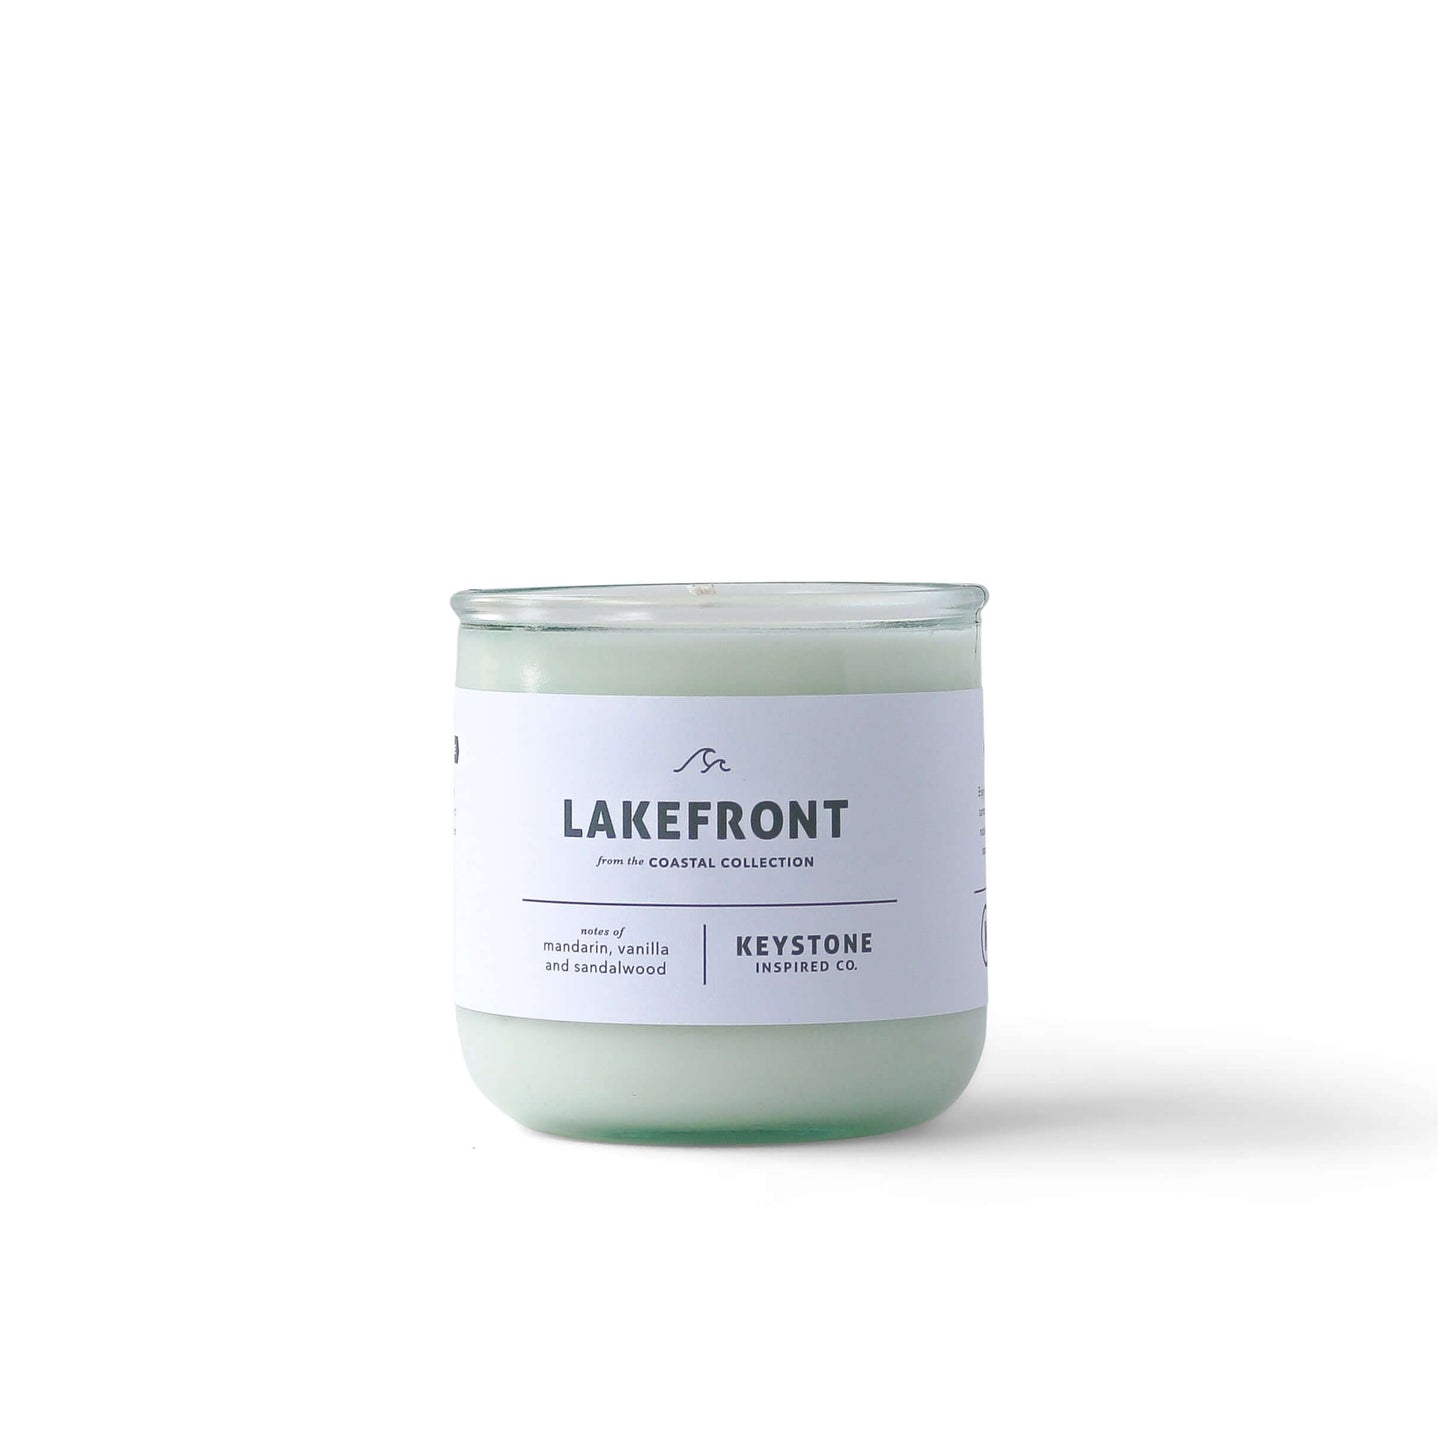 Eco-friendly Lakefront | Coastal Collection | 11.5 oz glass candle